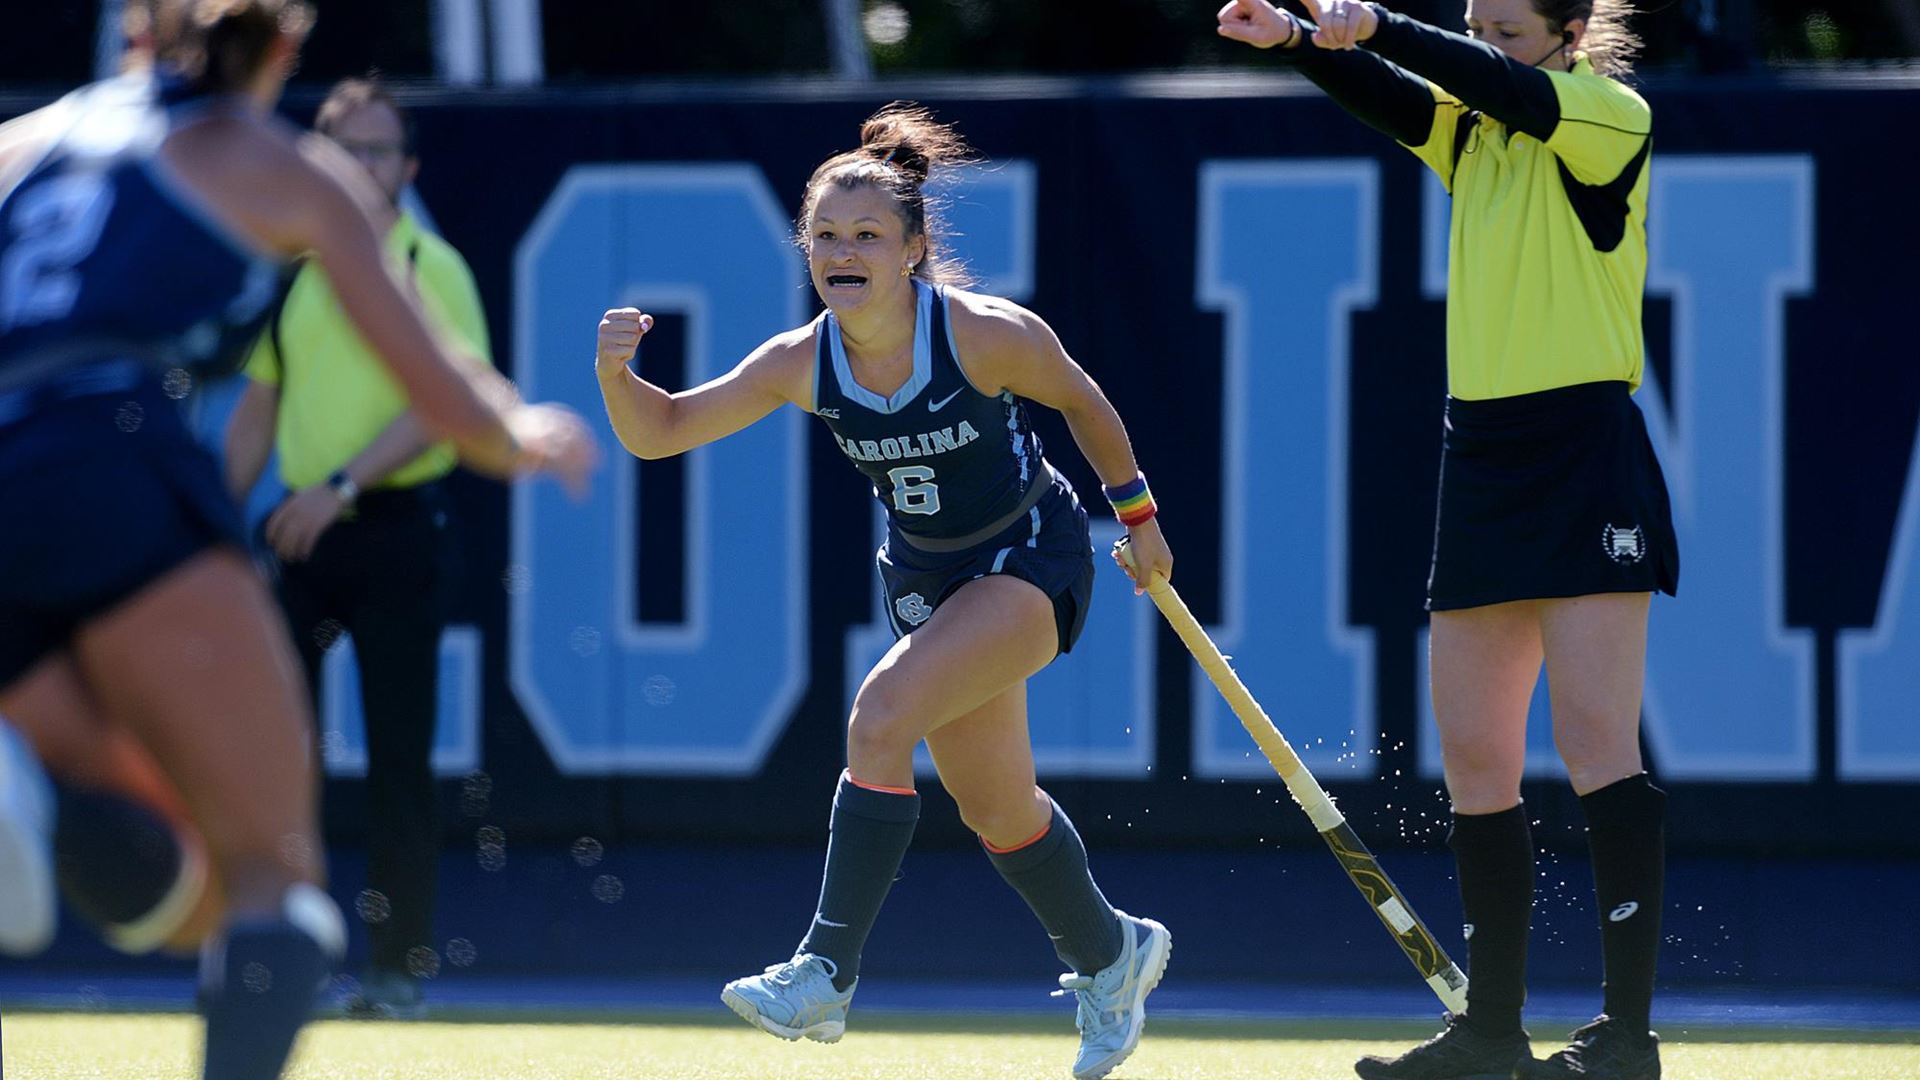 No. 17 Duke field hockey unable to complete comeback against No